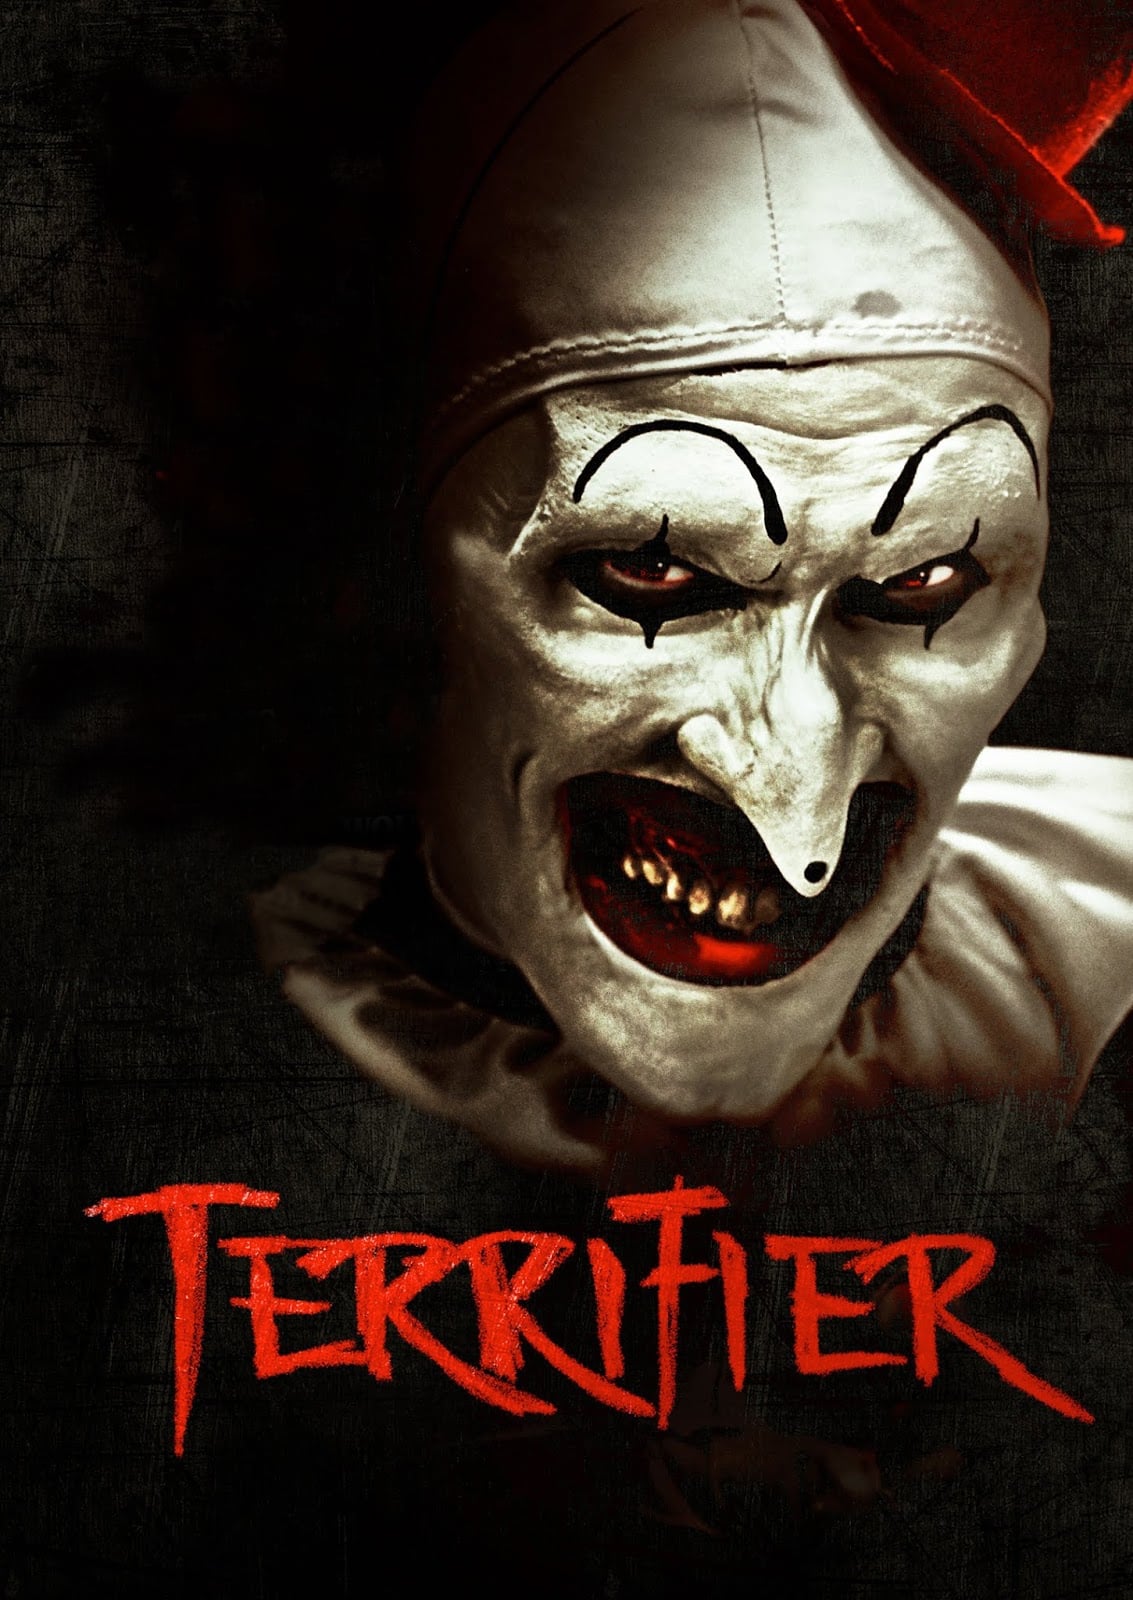 Terrifier (2016) - Horror Movie - HD Streaming with English Subtitles